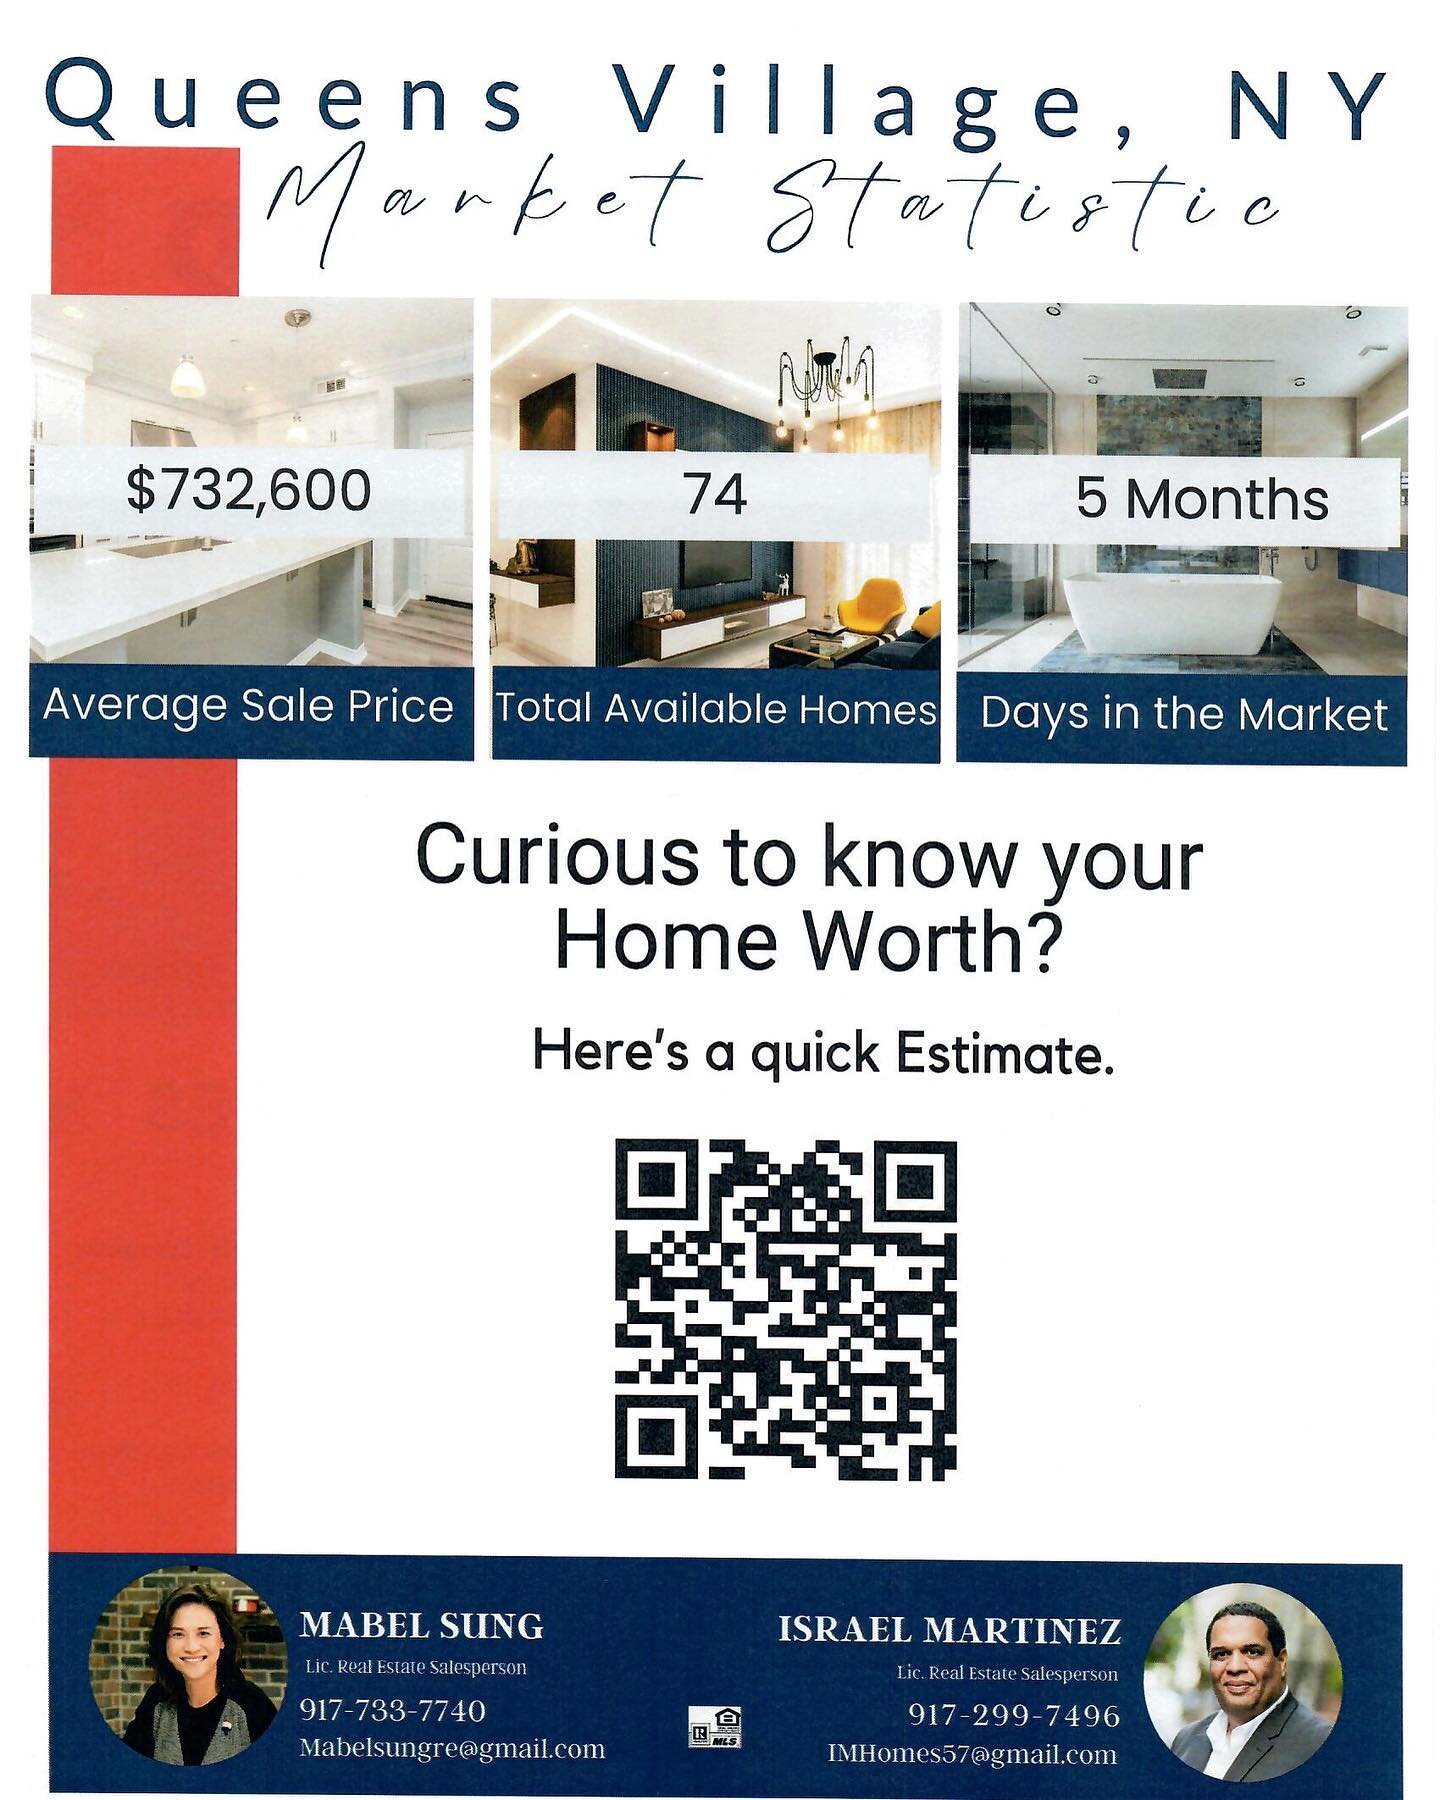 Here to help you discover what your home market price is in the current market.  #realestatemarket #marketing #market #statistics #realestatelife #home #homeforsale #nycrealestate #homesforsale #queens